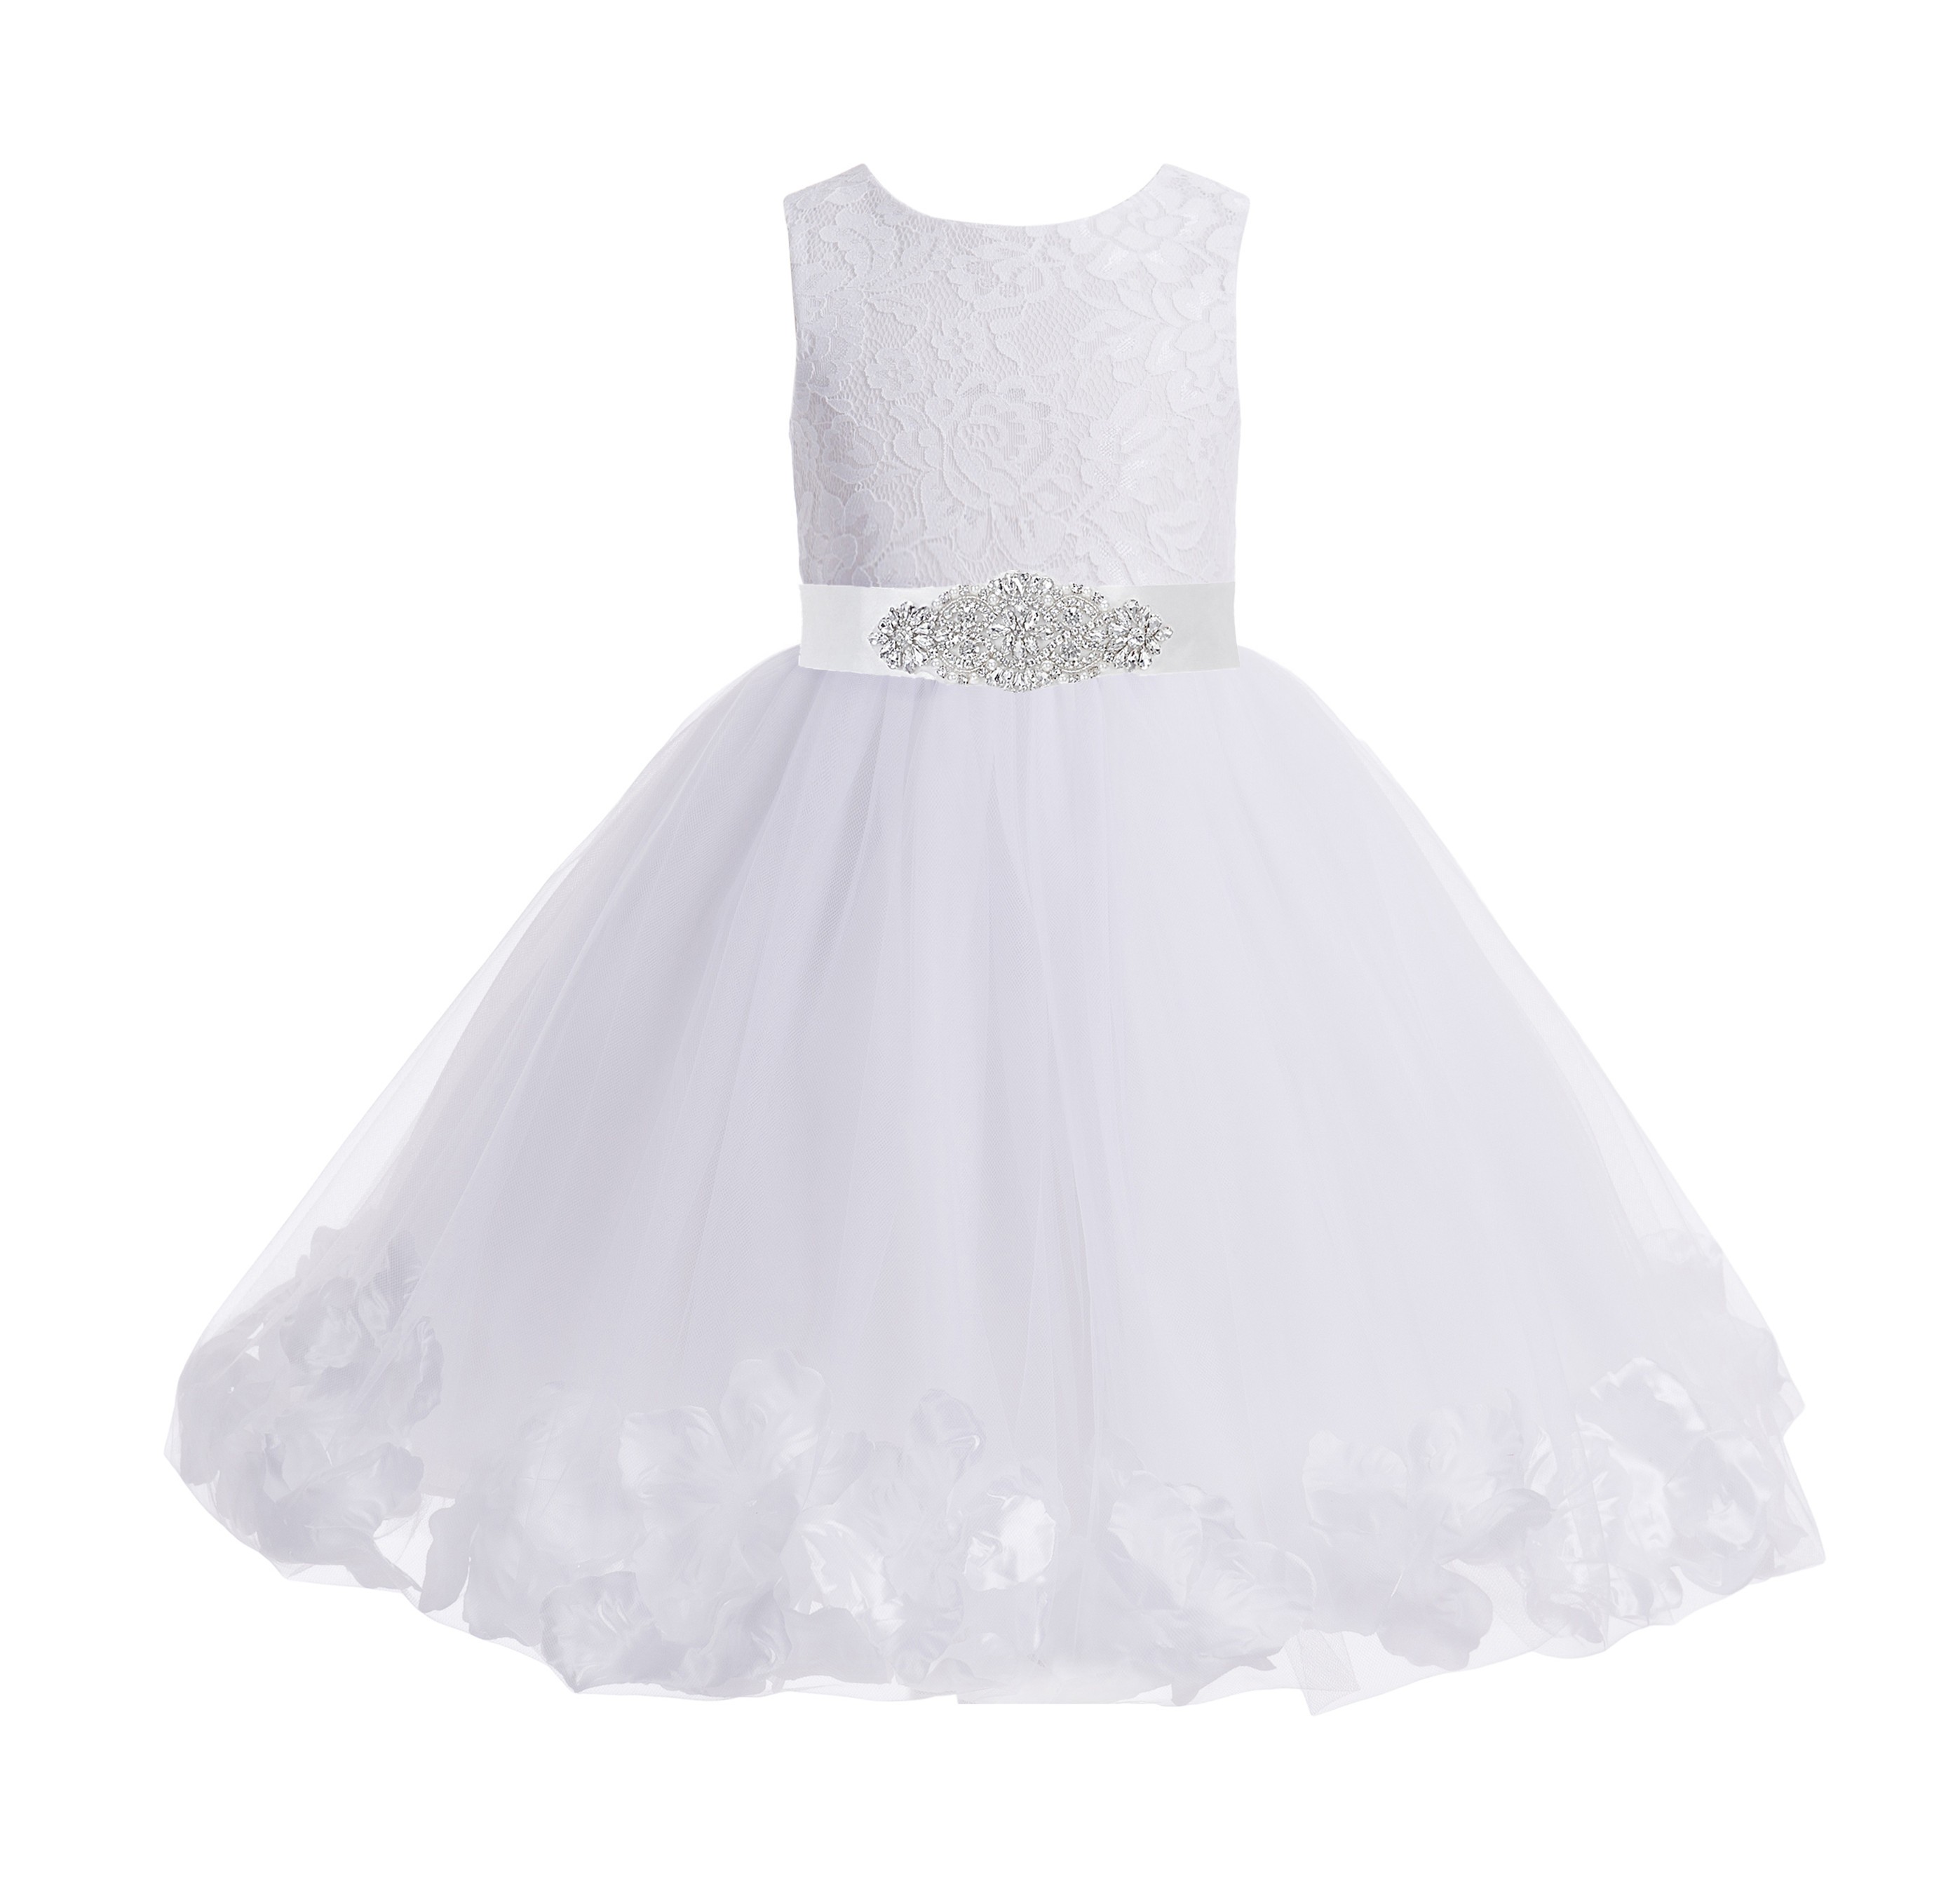 White Floral Lace Heart Cutout Flower Girl Dress with Petals 185